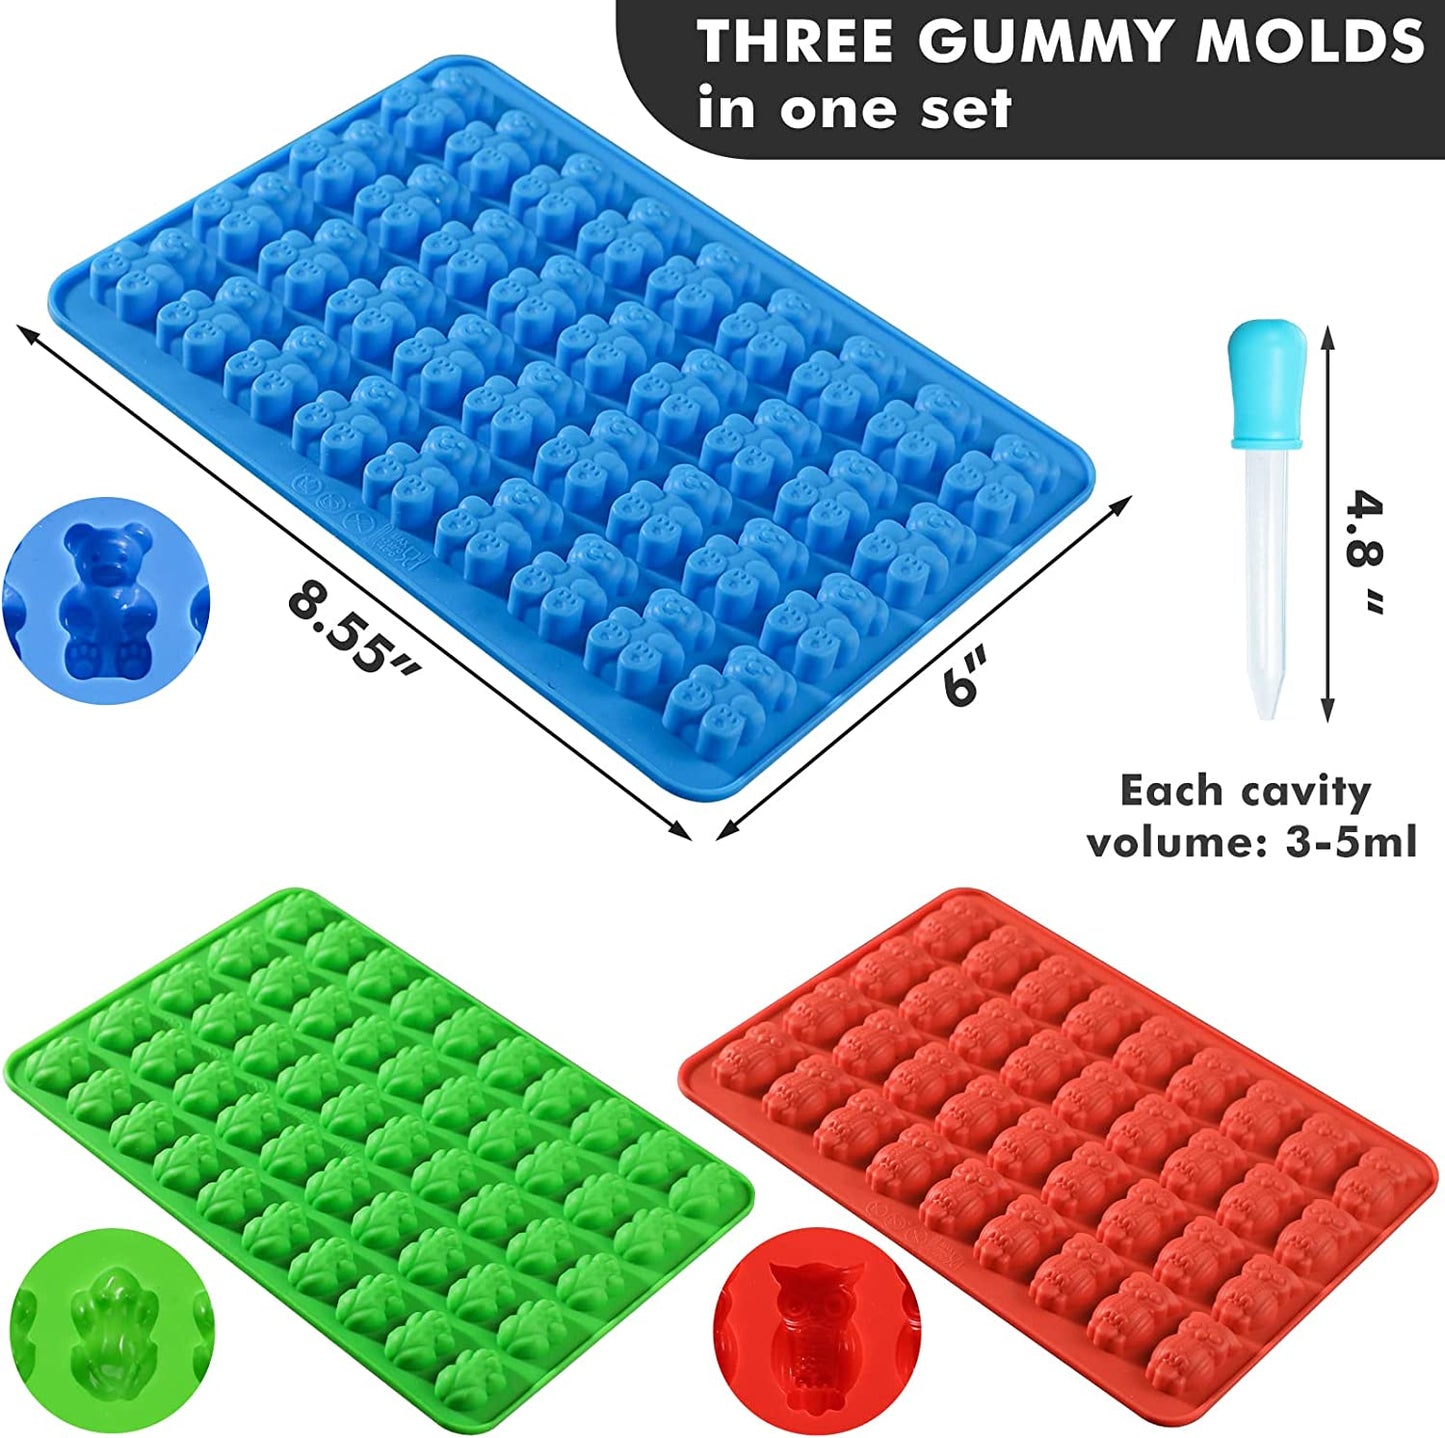 1 Pack of Silicone Gummy Bear Molds, Chocolate Molds-Make Large